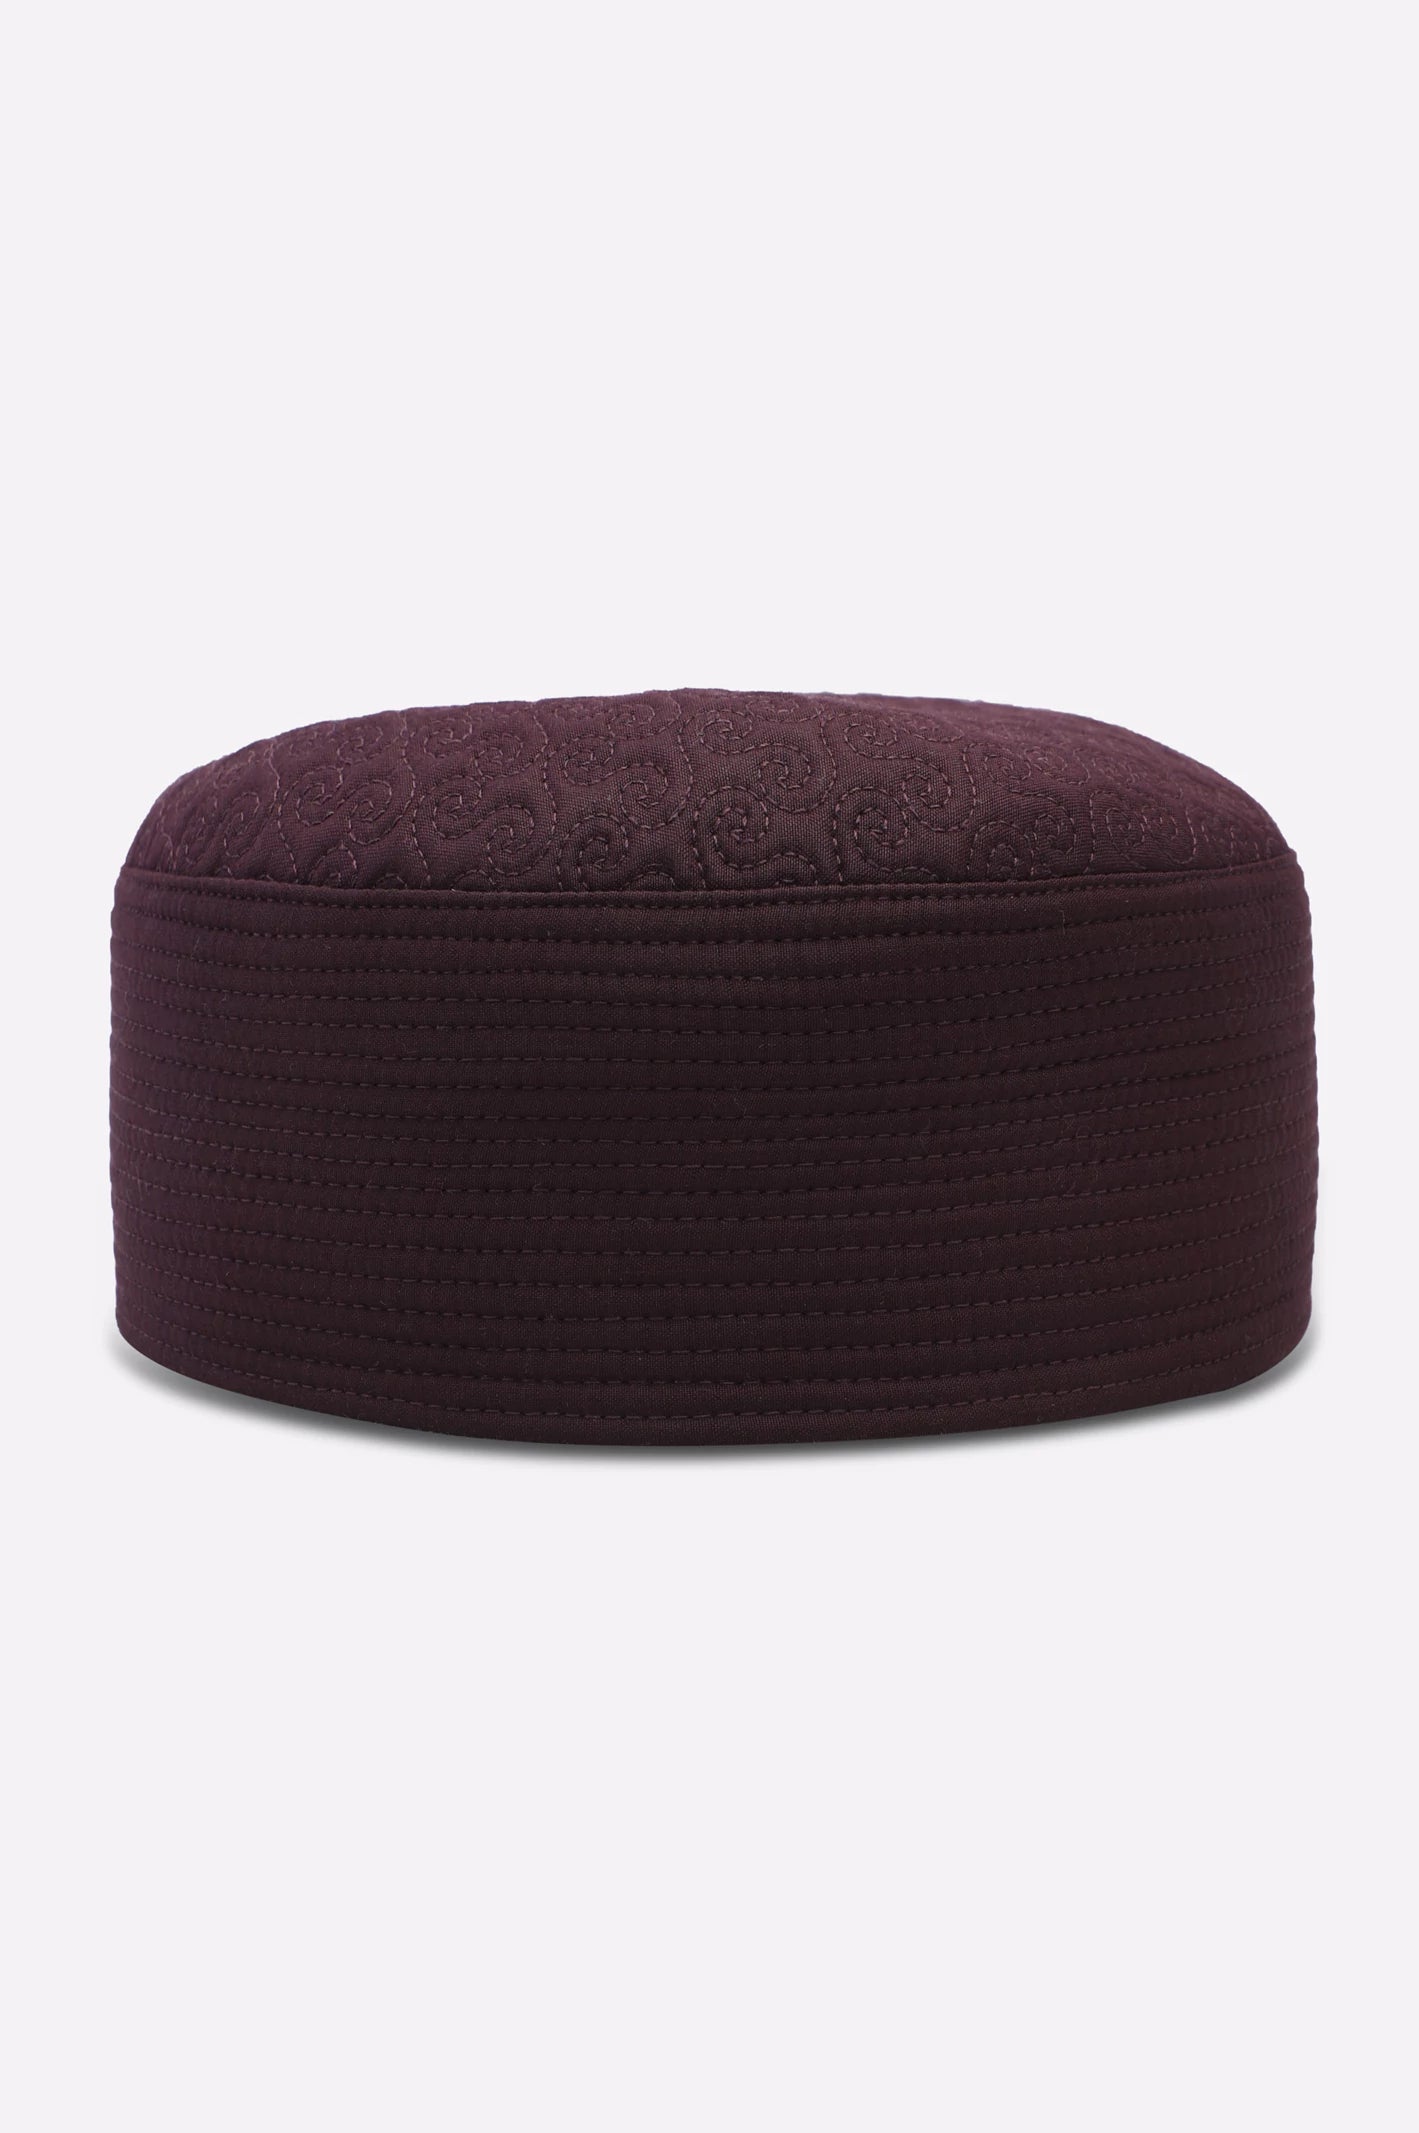 Maroon Caps For Men From Diners